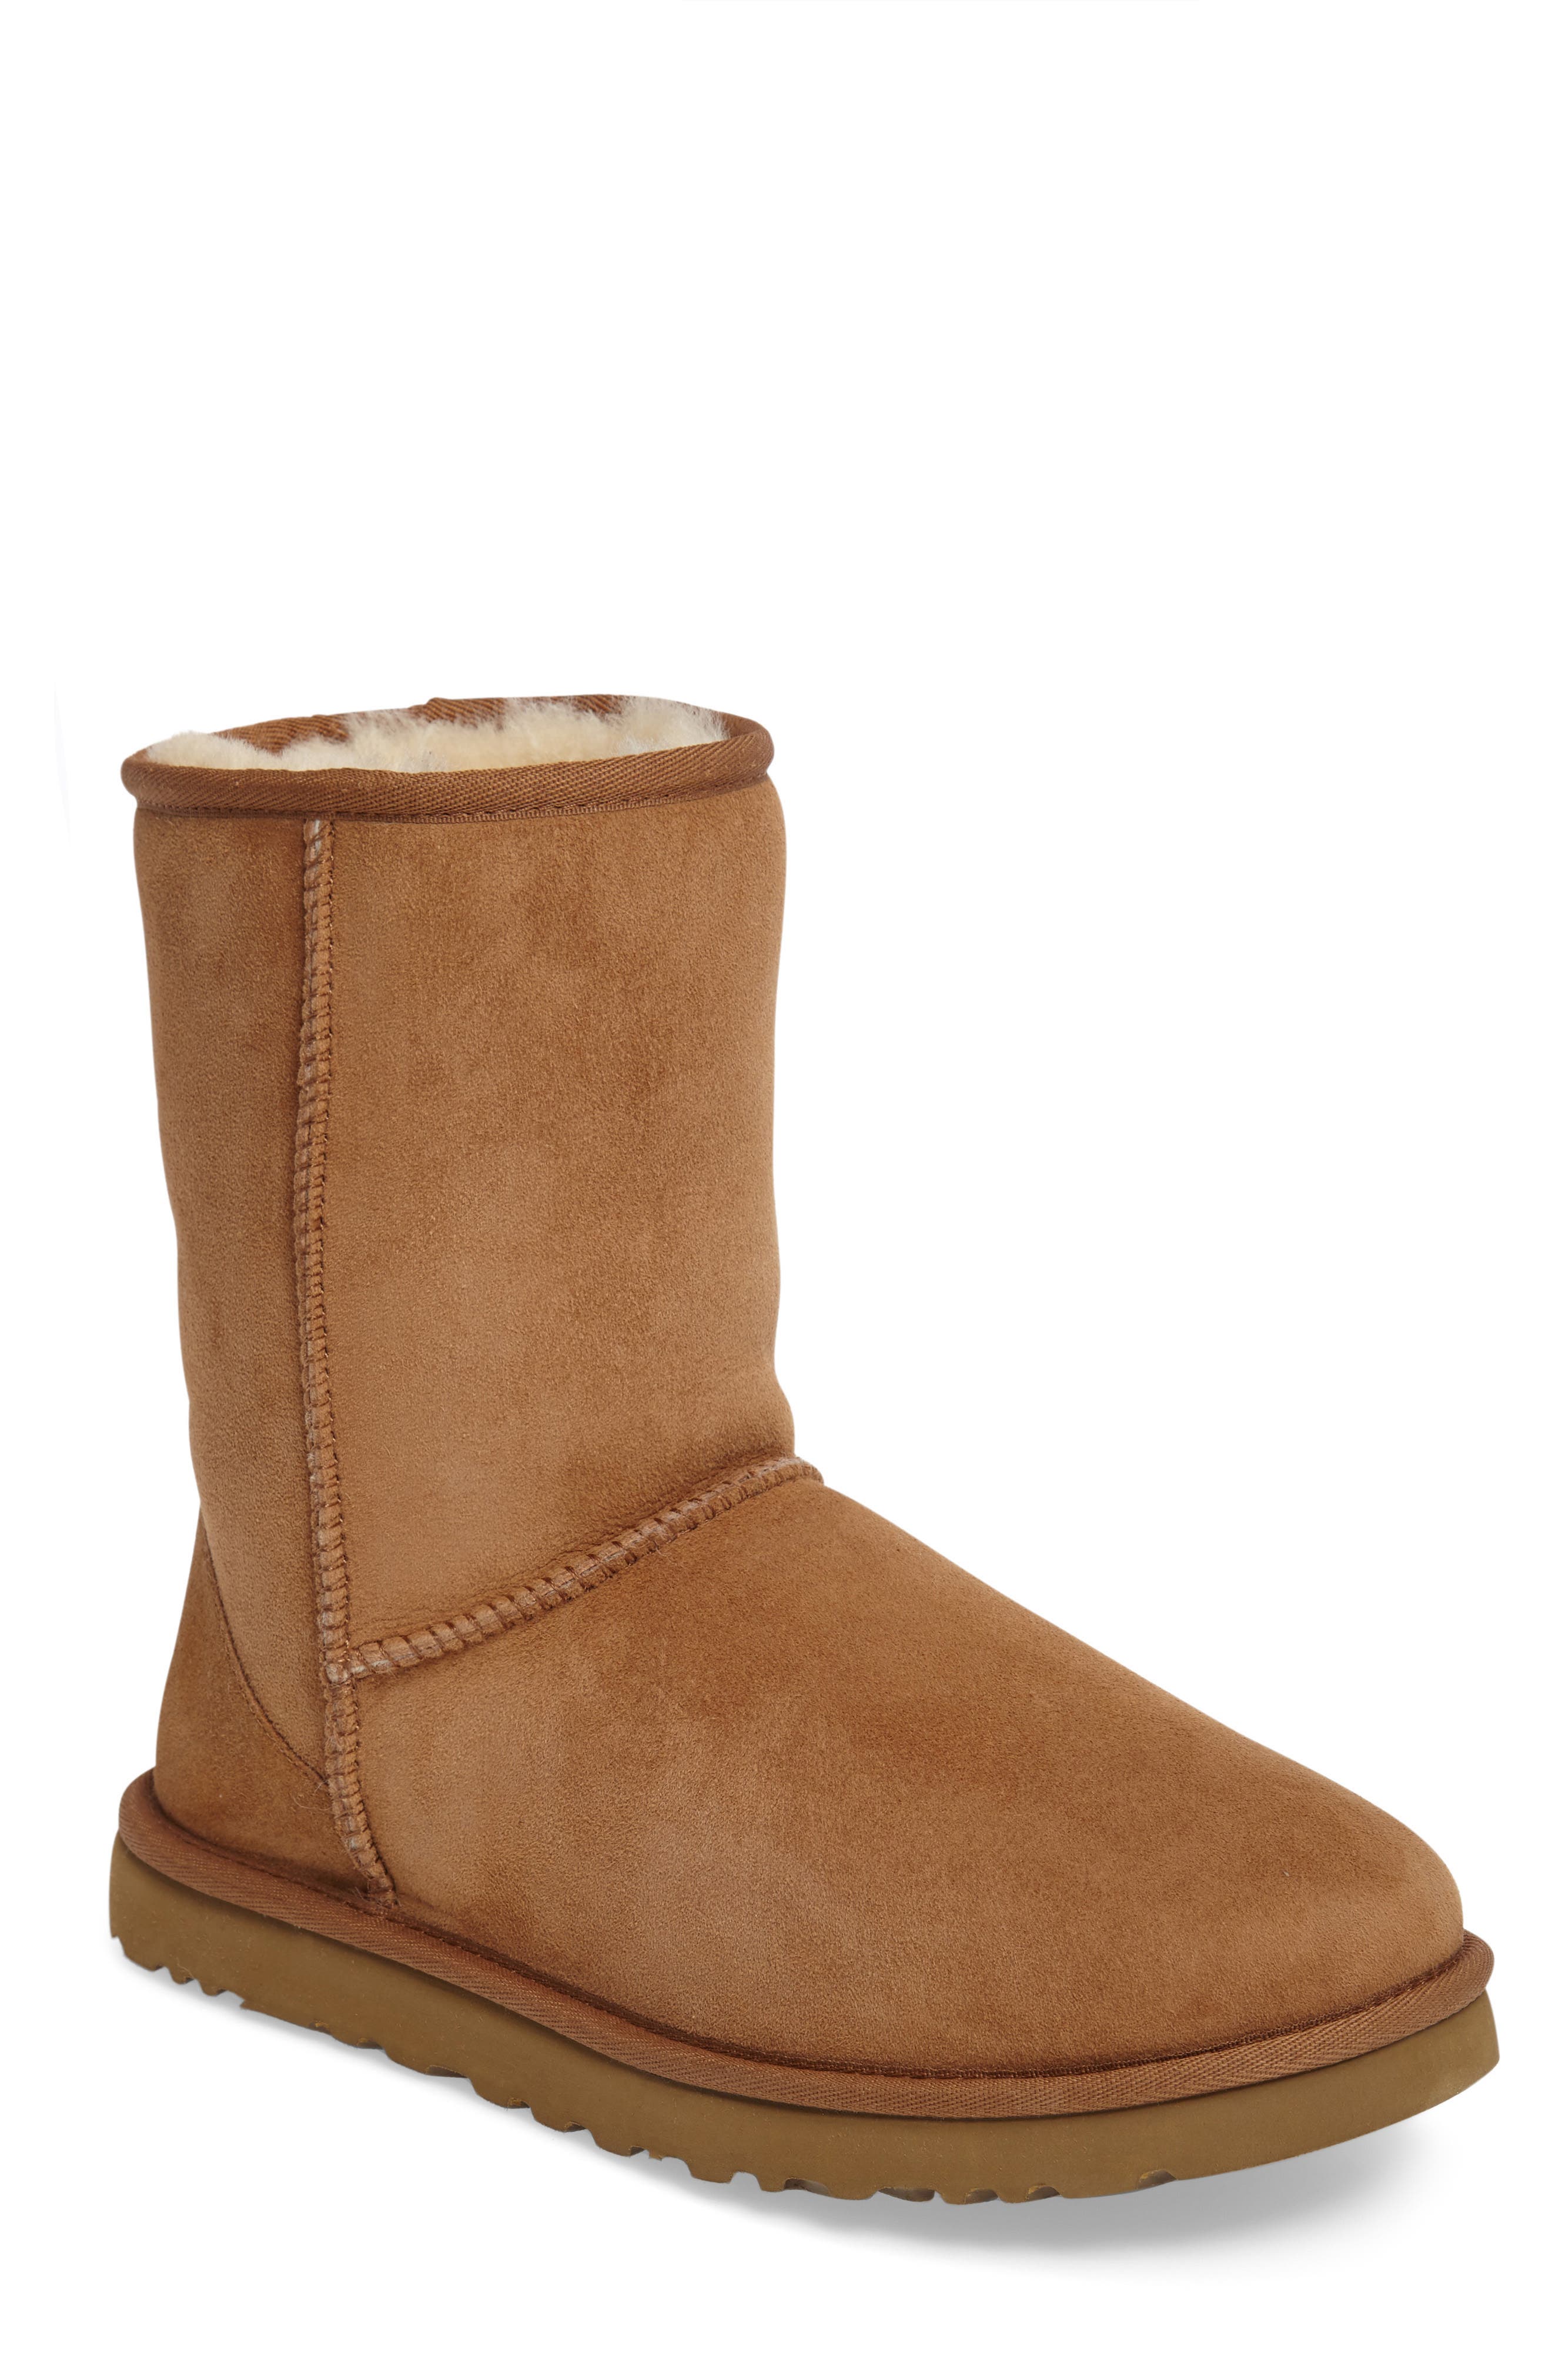 ugg boots at nordstrom